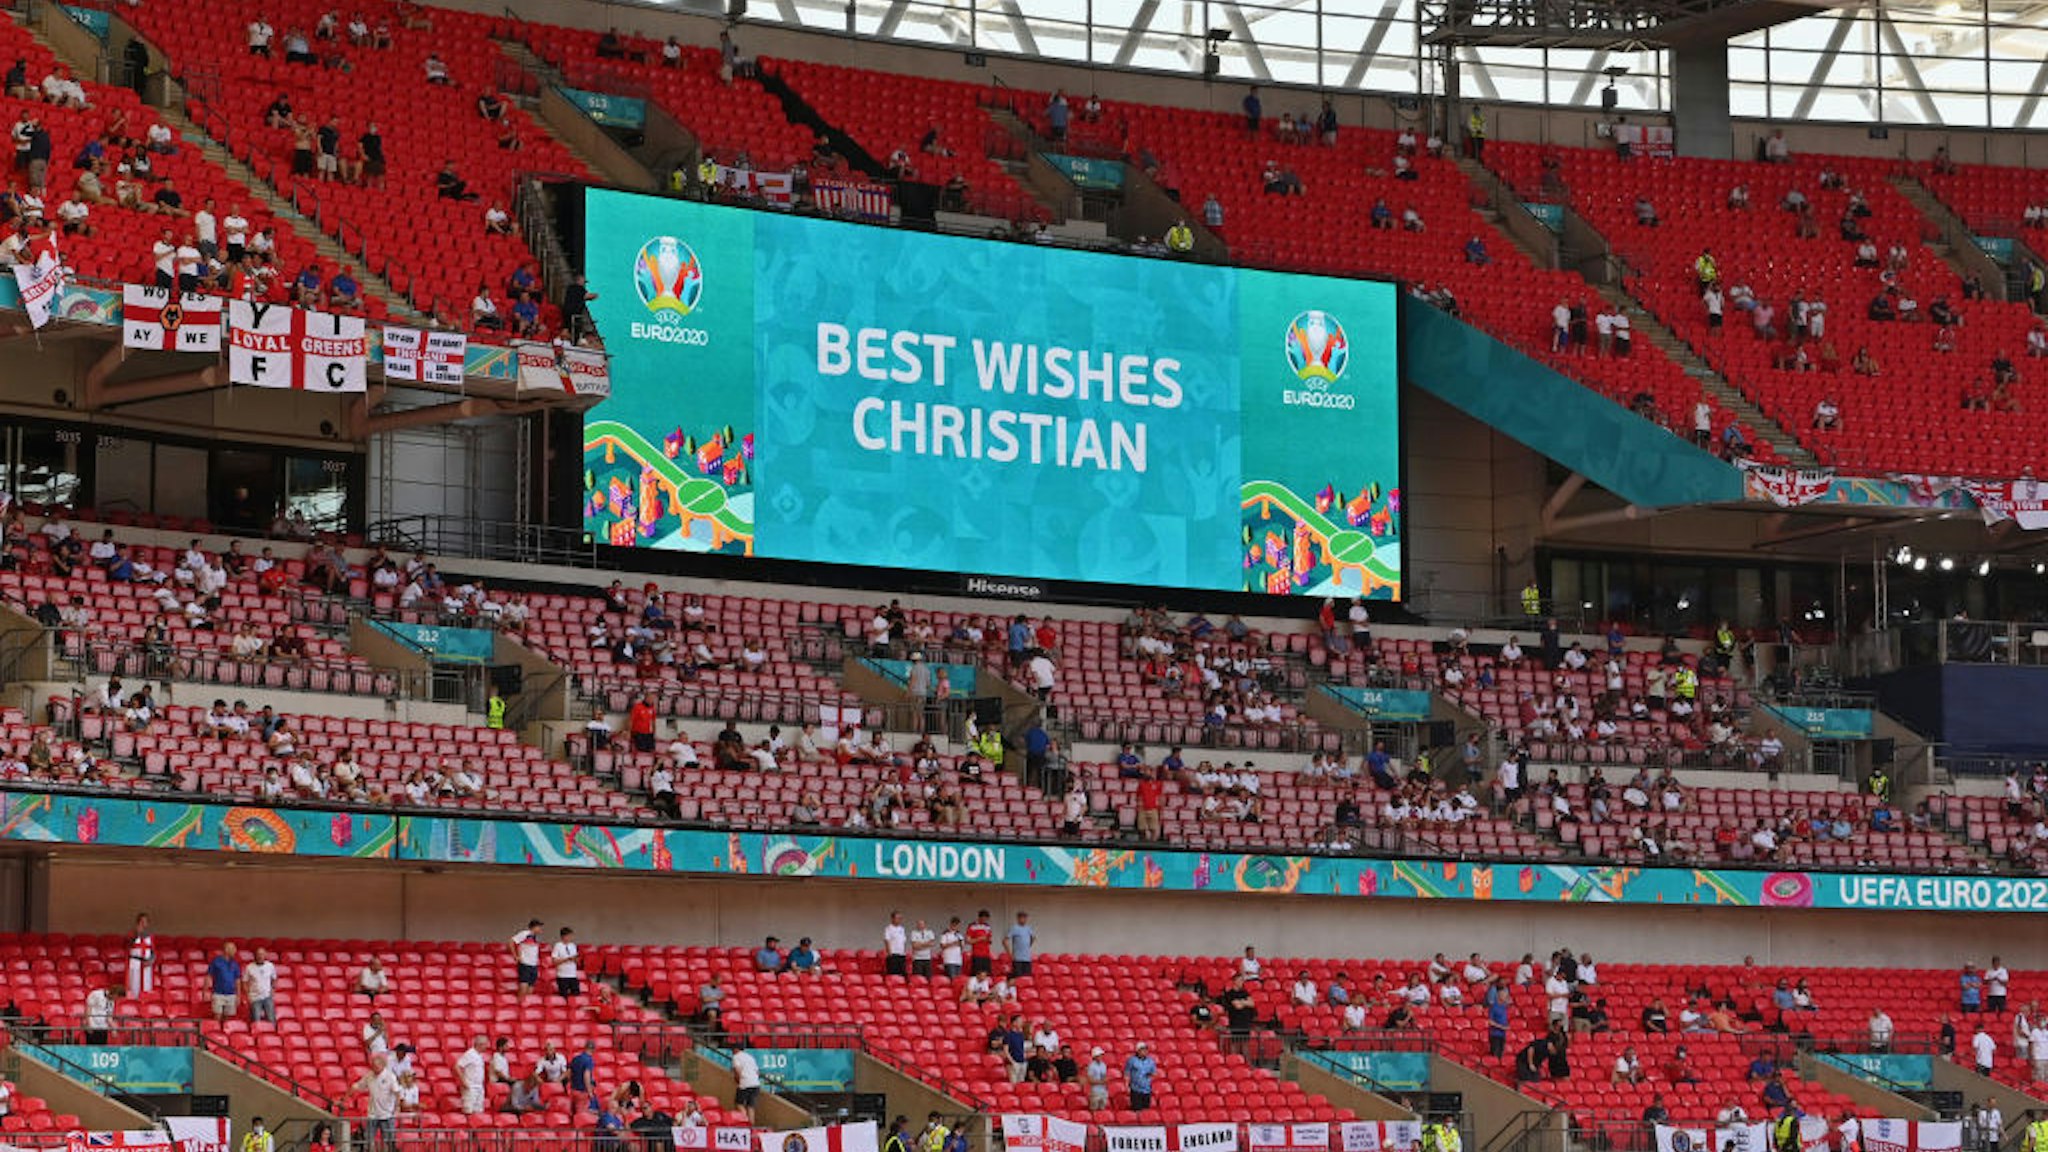 LONDON, ENGLAND - JUNE 13: A detailed view of the LED screen inside the stadium which shows a message of support for Christian Eriksen of Denmark (not pictured) prior to the UEFA Euro 2020 Championship Group D match between England and Croatia at Wembley Stadium on June 13, 2021 in London, England. (Photo by Justin Tallis - Pool/Getty Images )